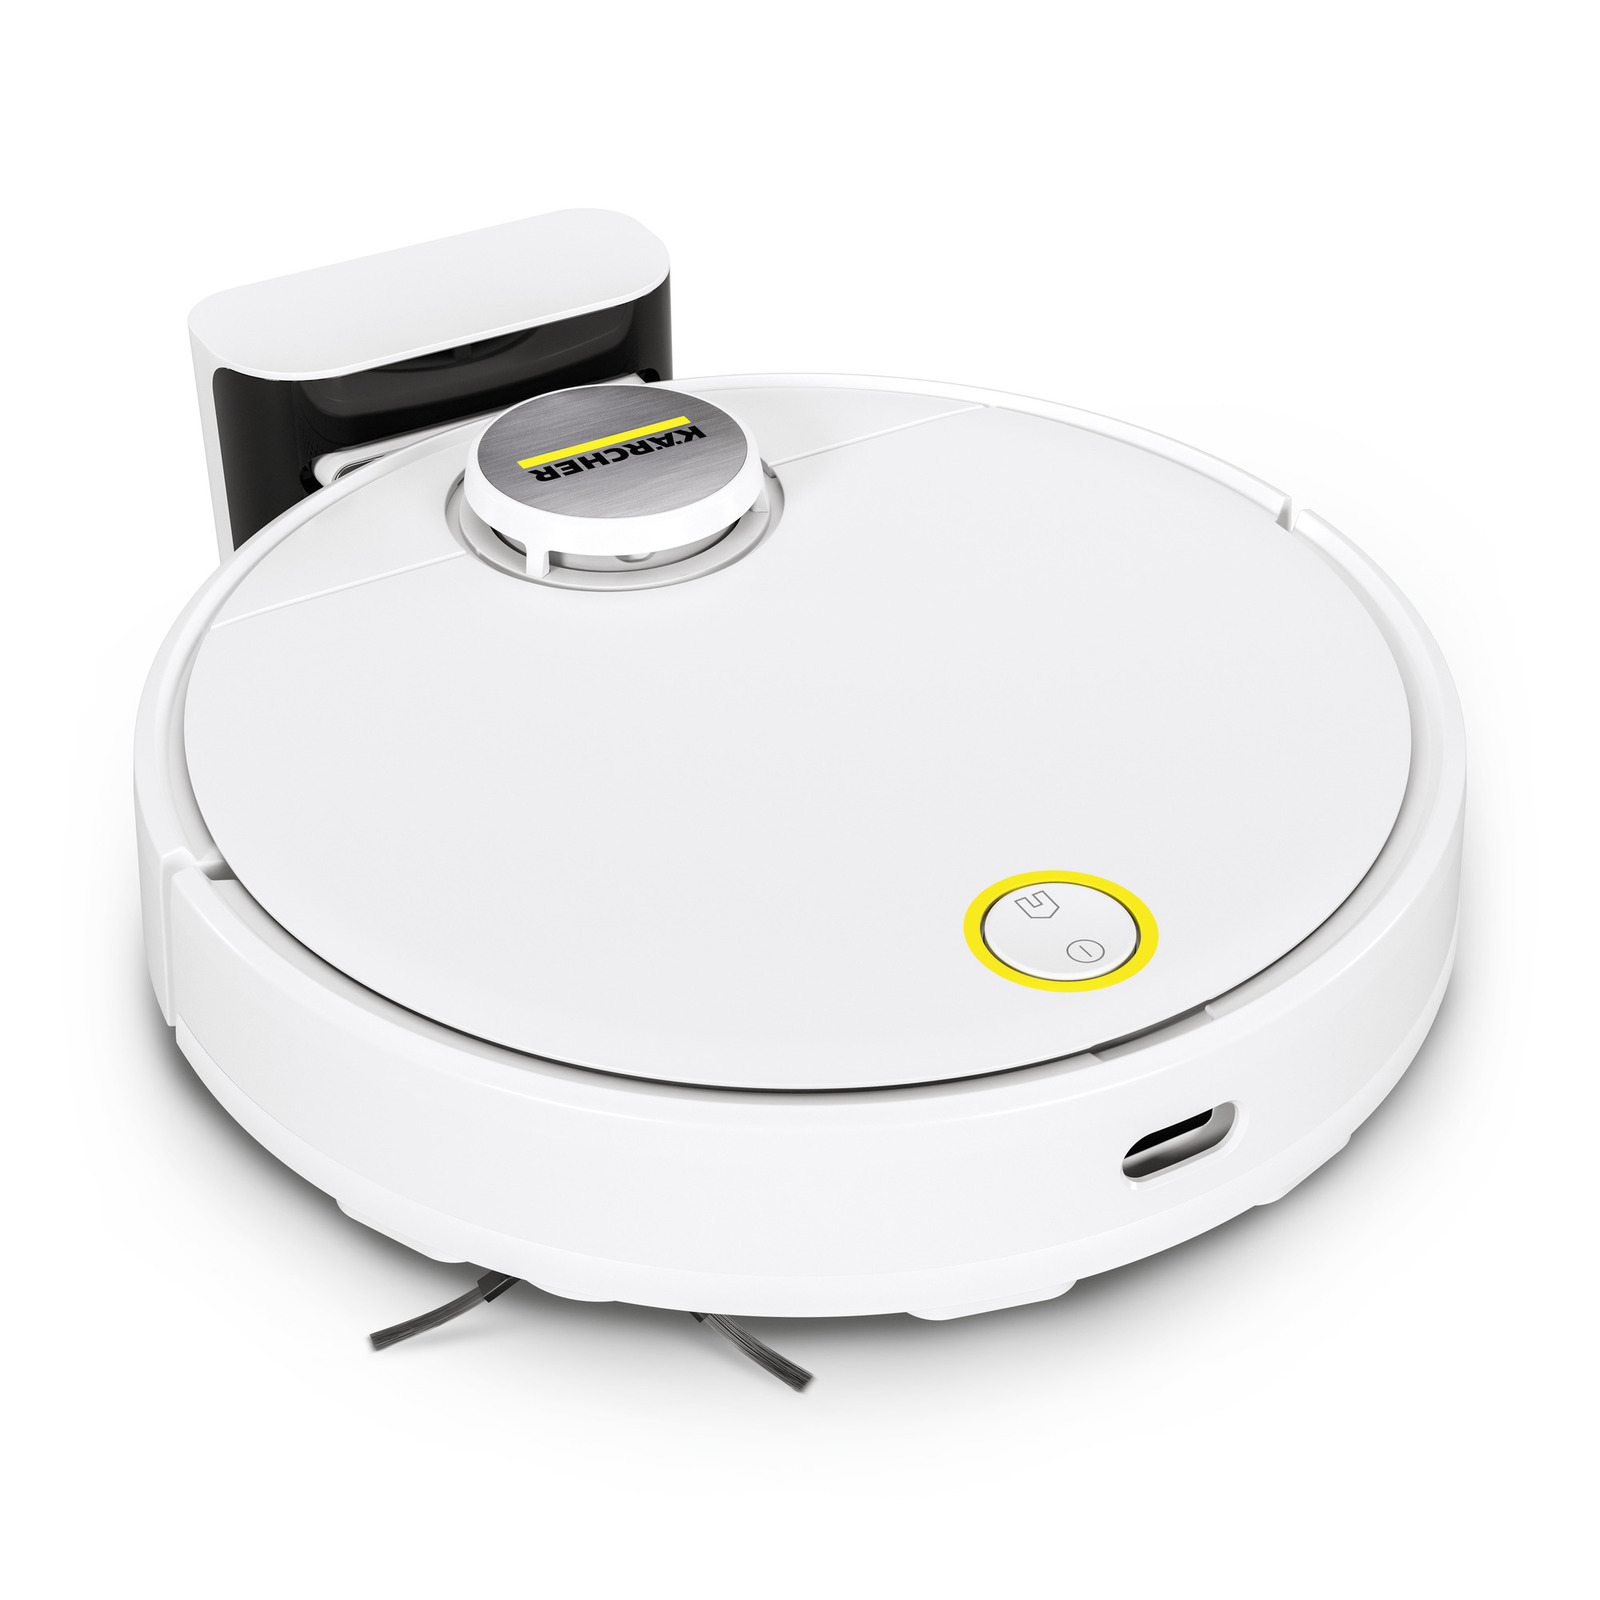 KÄRCHER, Robot Vacuum Cleaner, With Wiping Function,  [RCV 3] | Home Appliances | Vacuums